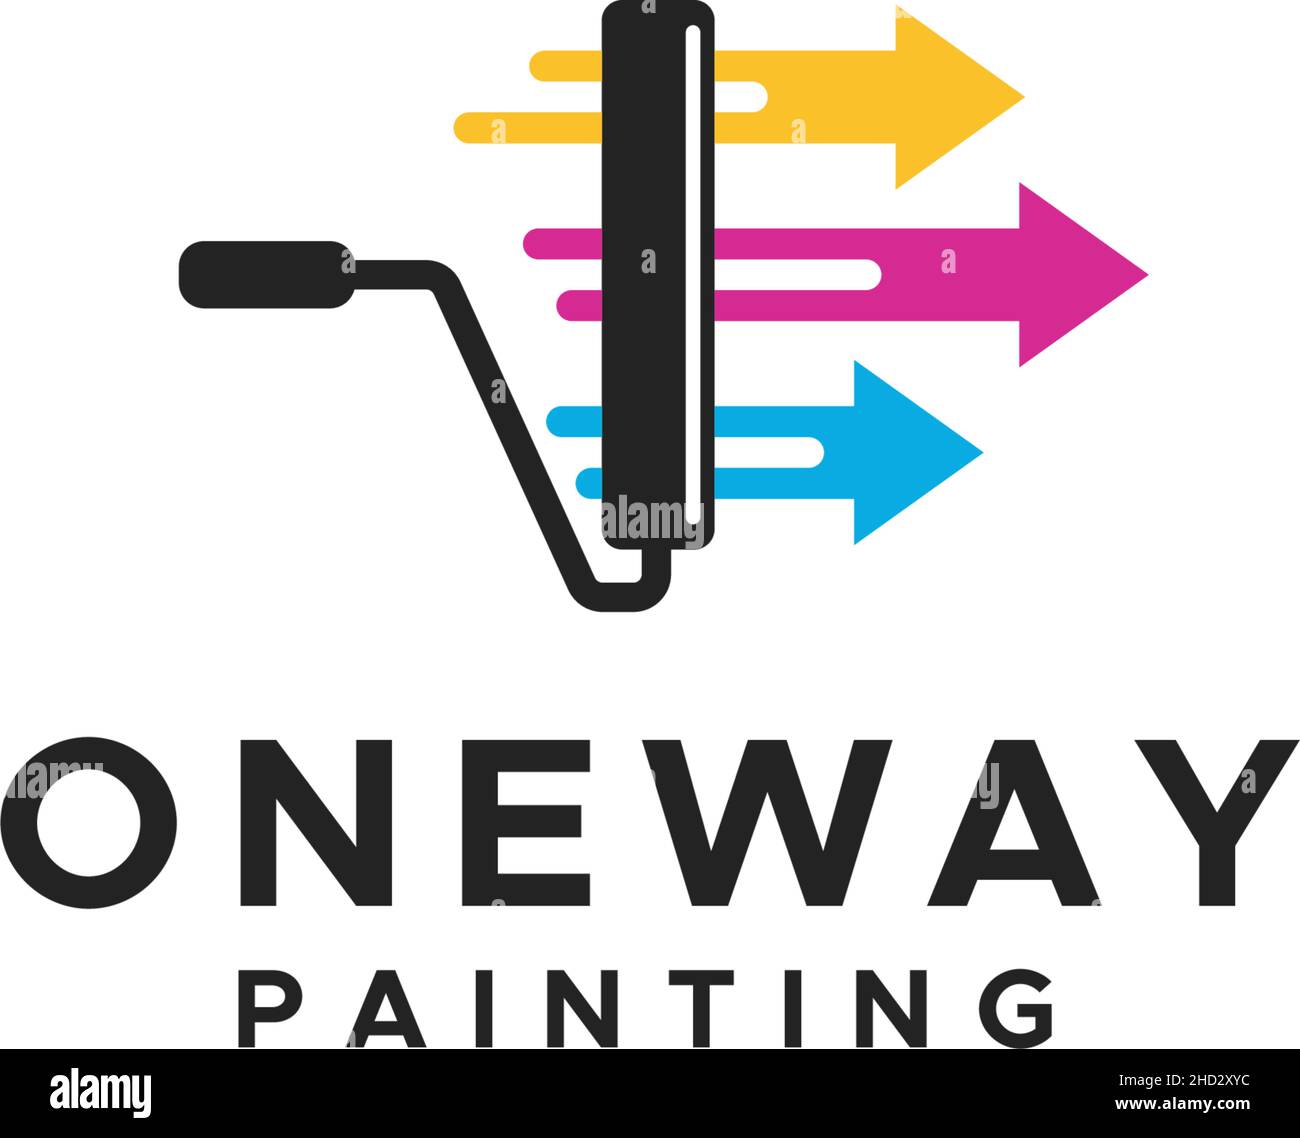 Modern colorful design ONEWAY PAINTING logo design Stock Vector